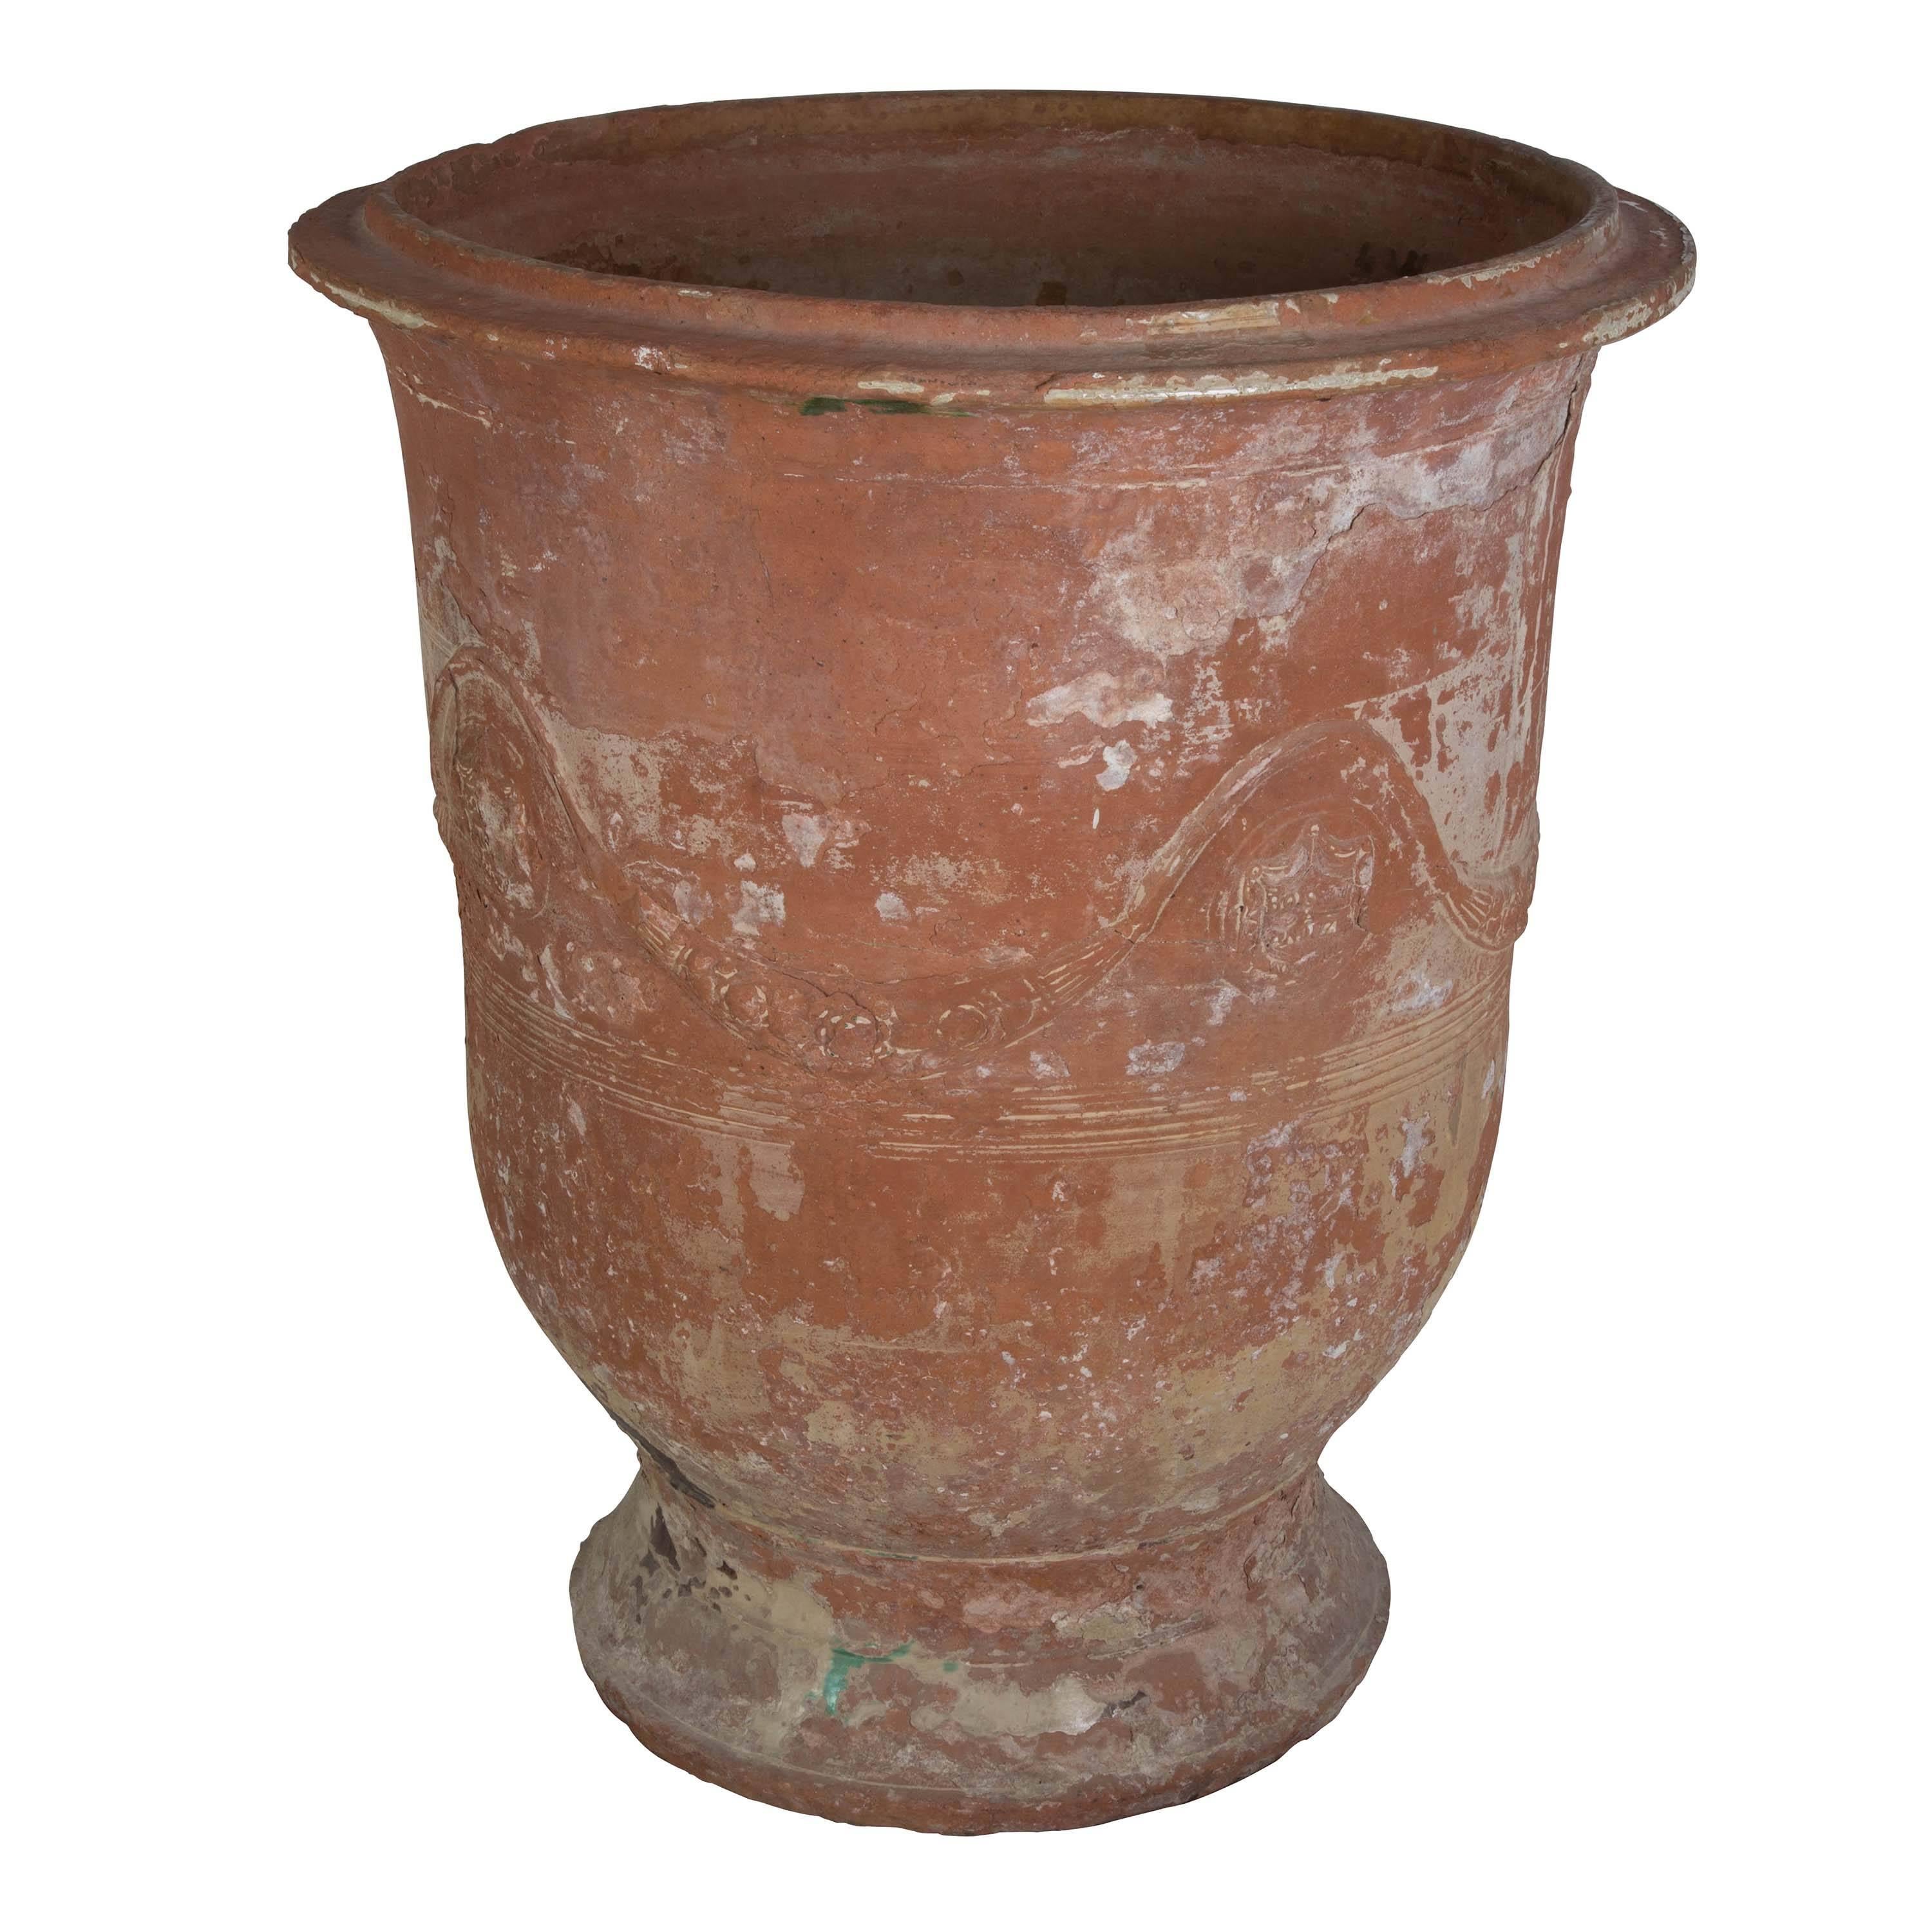 A superb example of an early 19th century French terracotta lemon tree planter from Anduze.